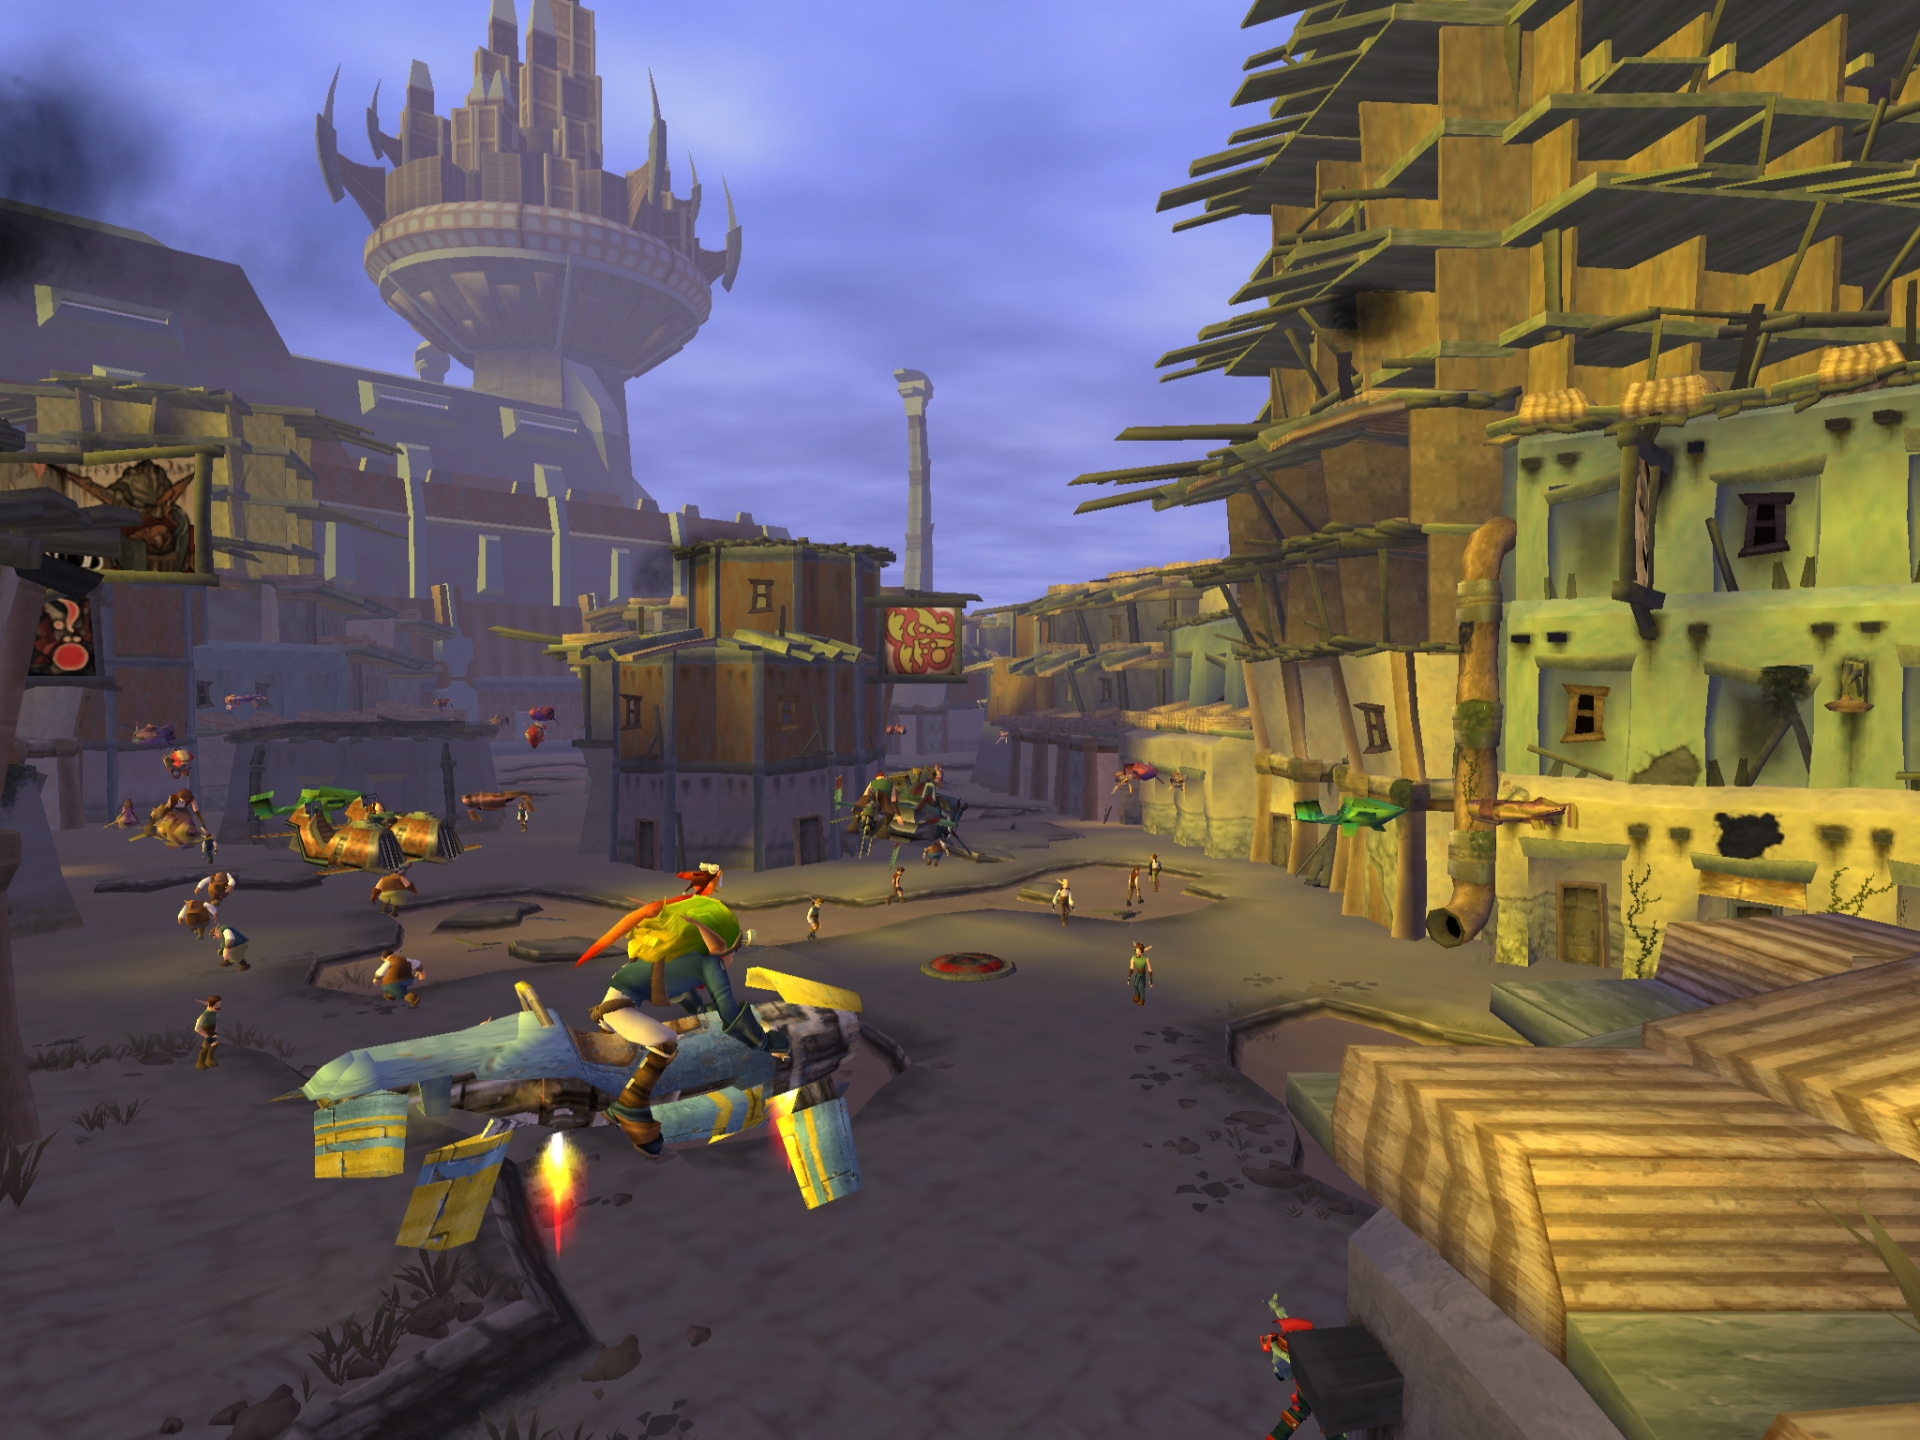 Game jack 2. Jak and Daxter 2. Хейвен Сити. Jak and Daxter: the precursor Legacy (2001). Jak 2 Renegade.